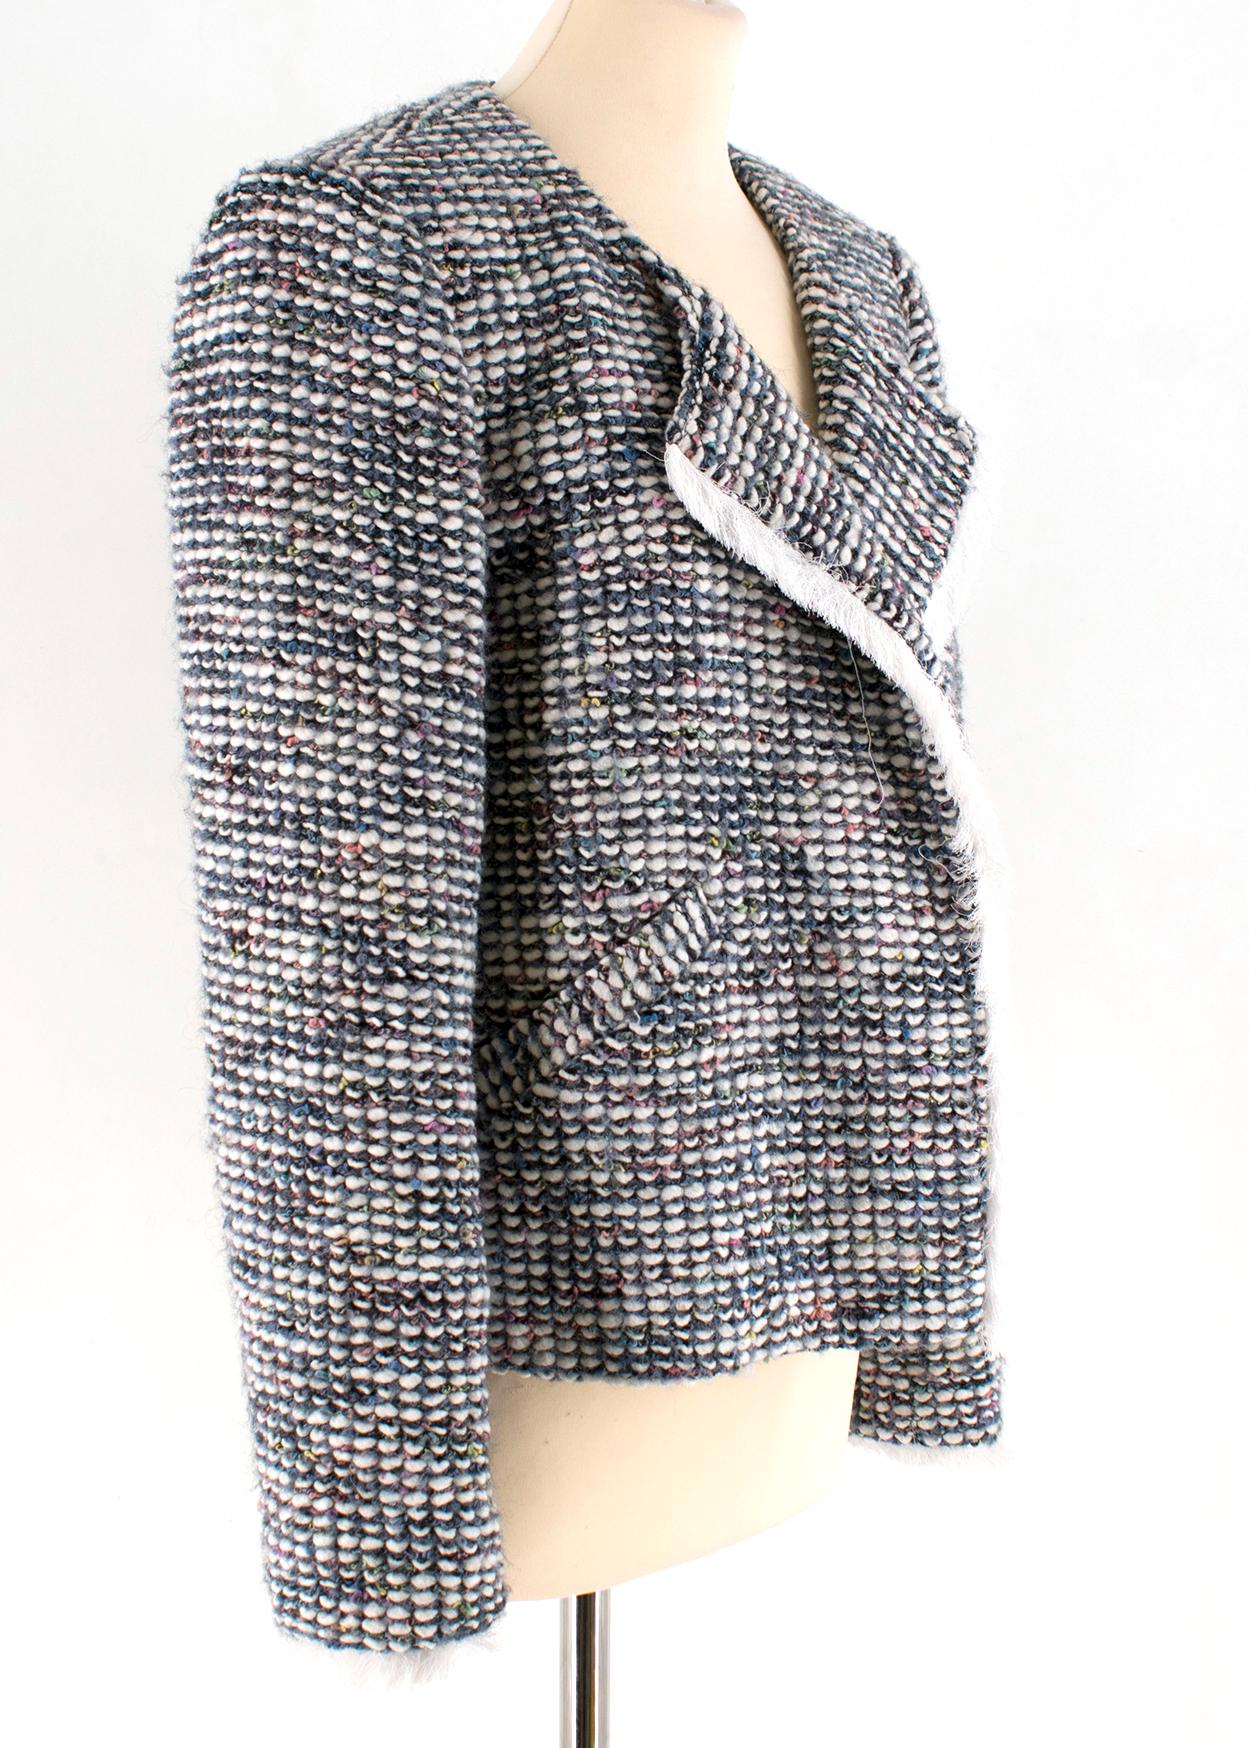 Elizabeth and James Clark Tweed Jacket

- multicolour blazer
- short length
- fringe trim 
- lined
- lightly padded shoulders
- no closures

Please note, these items are pre-owned and may show some signs of storage, even when unworn and unused. This